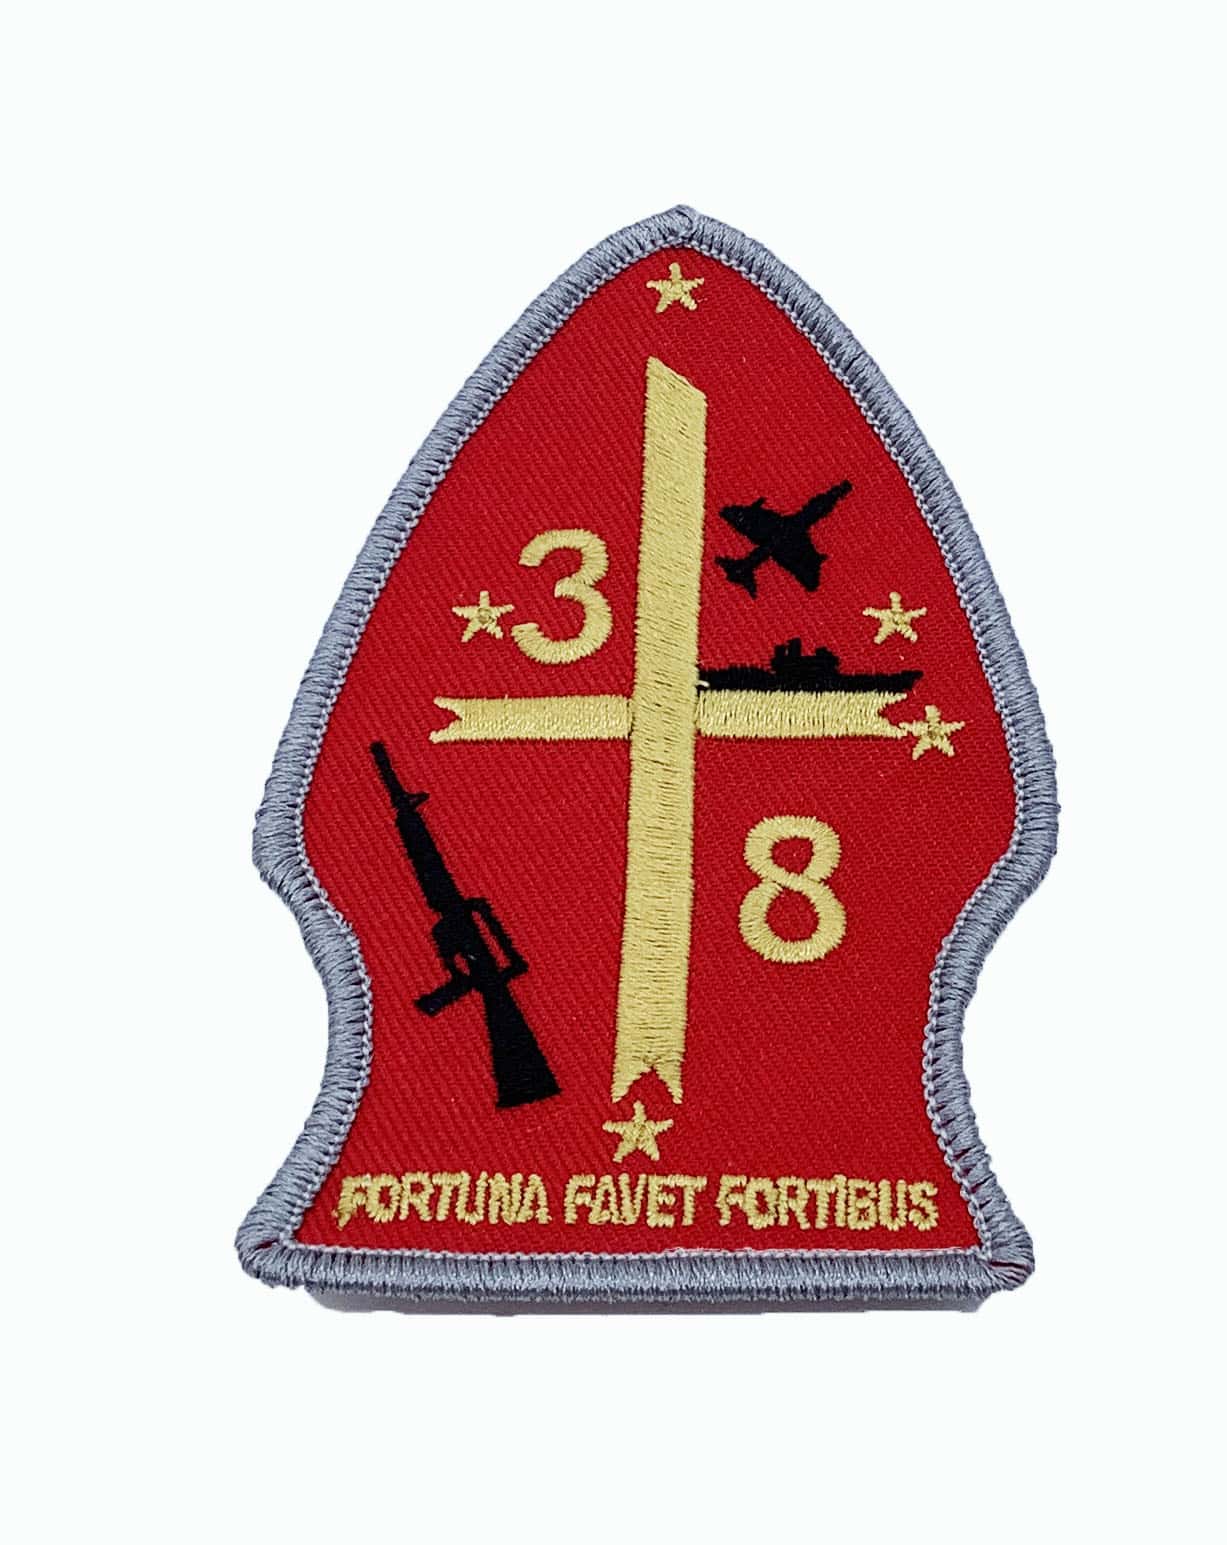 3rd Bn 8th Marines Patch – No Hook and Loop